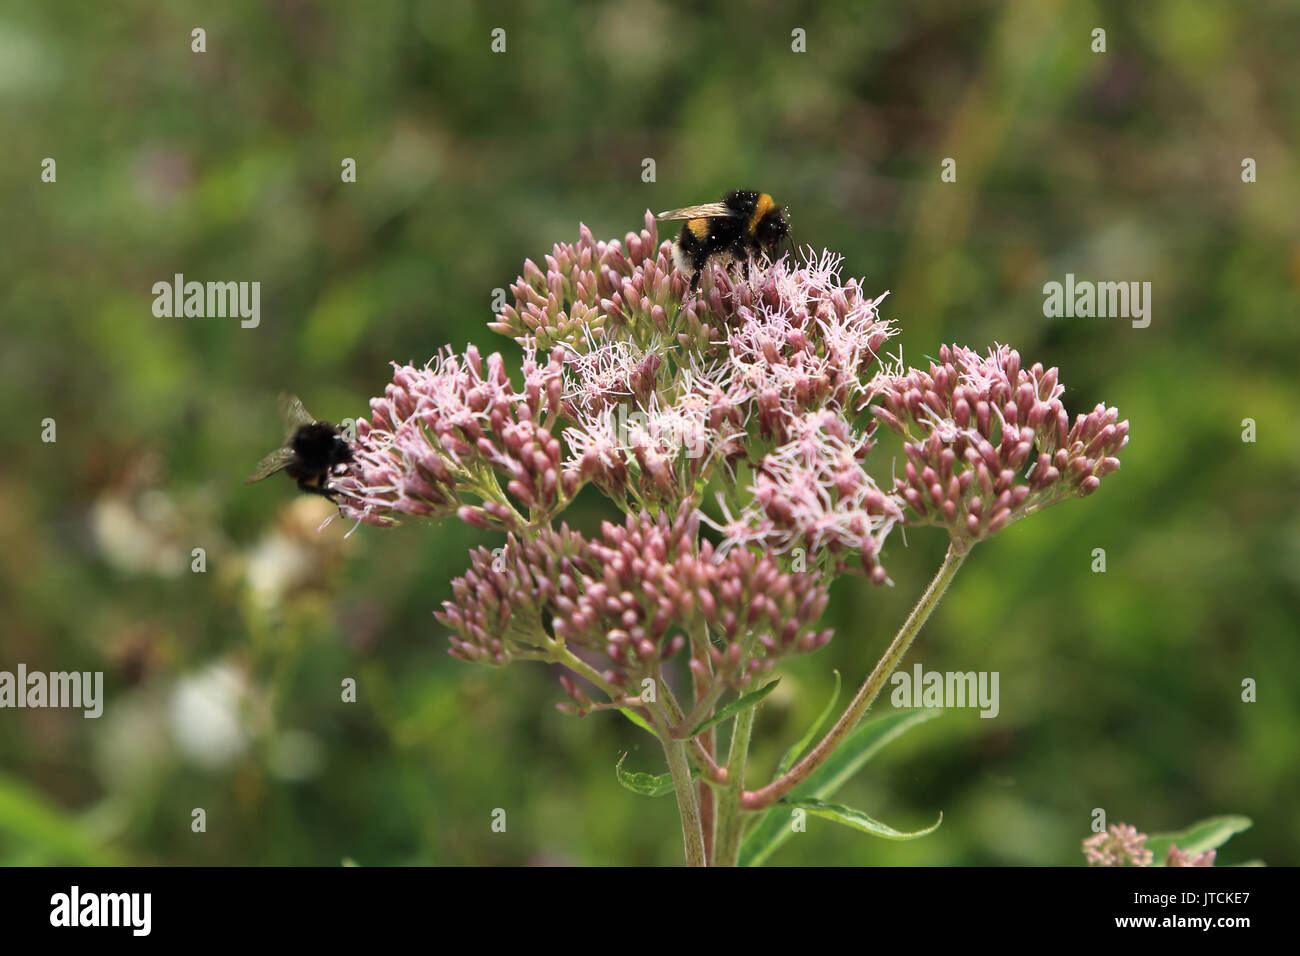 Bee on flower head in Jardin des Plantes, Amiens, France Stock Photo